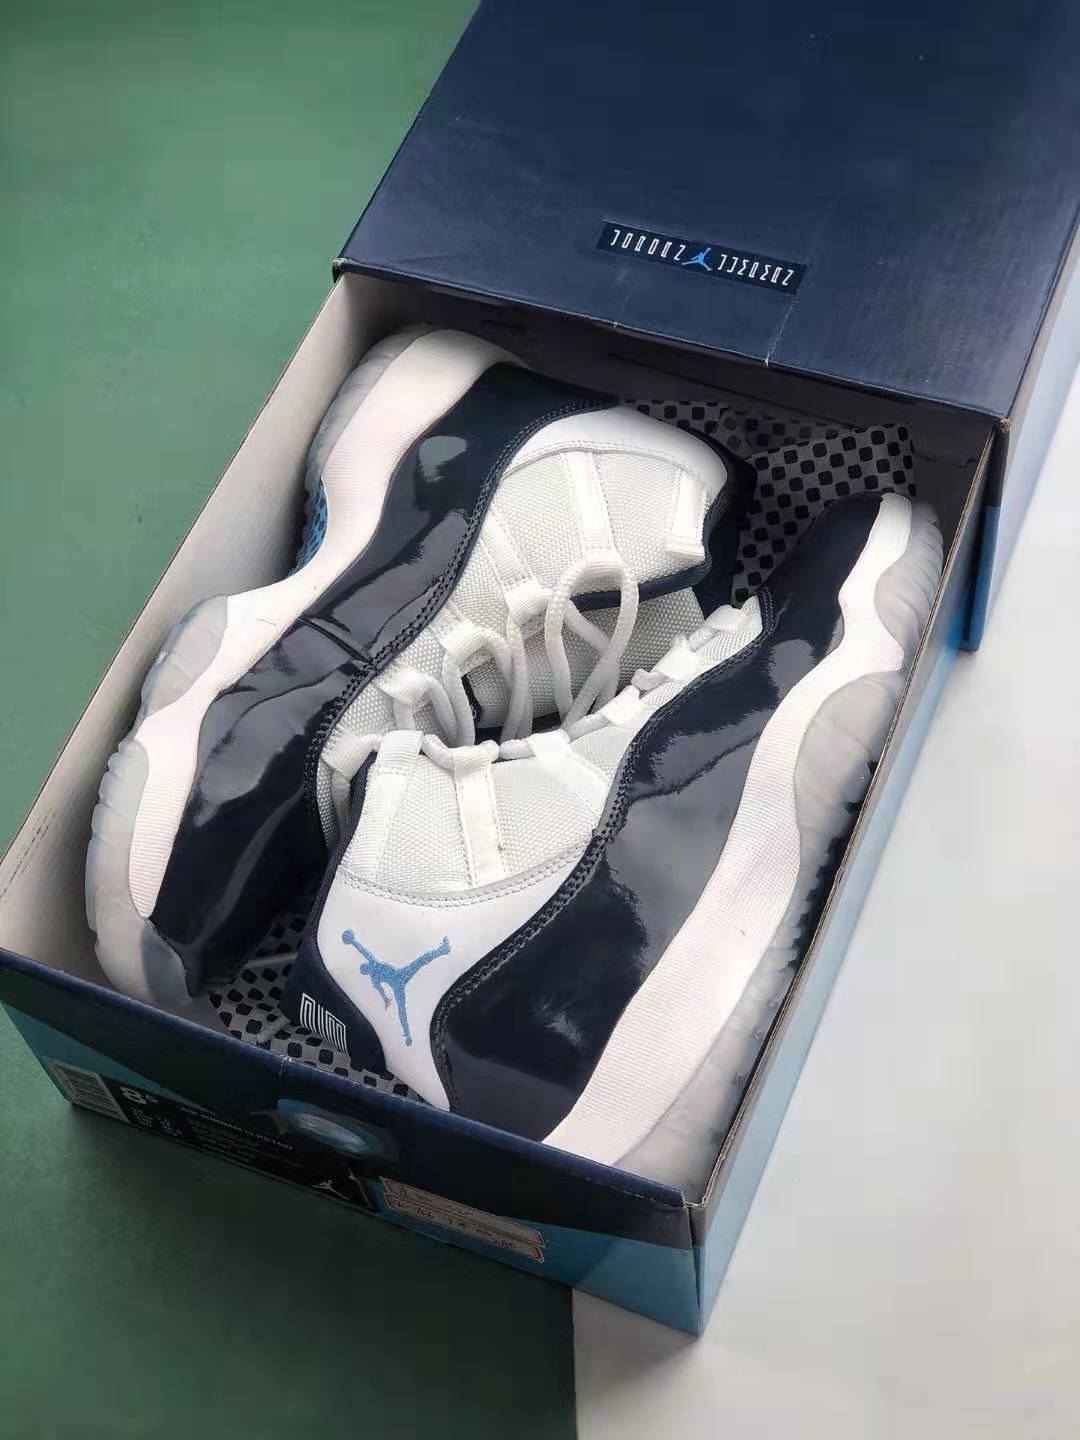 Air Jordan 11 Retro 'Win Like 82' 378037-123: Authentic Classic Sneakers for Basketball Enthusiasts